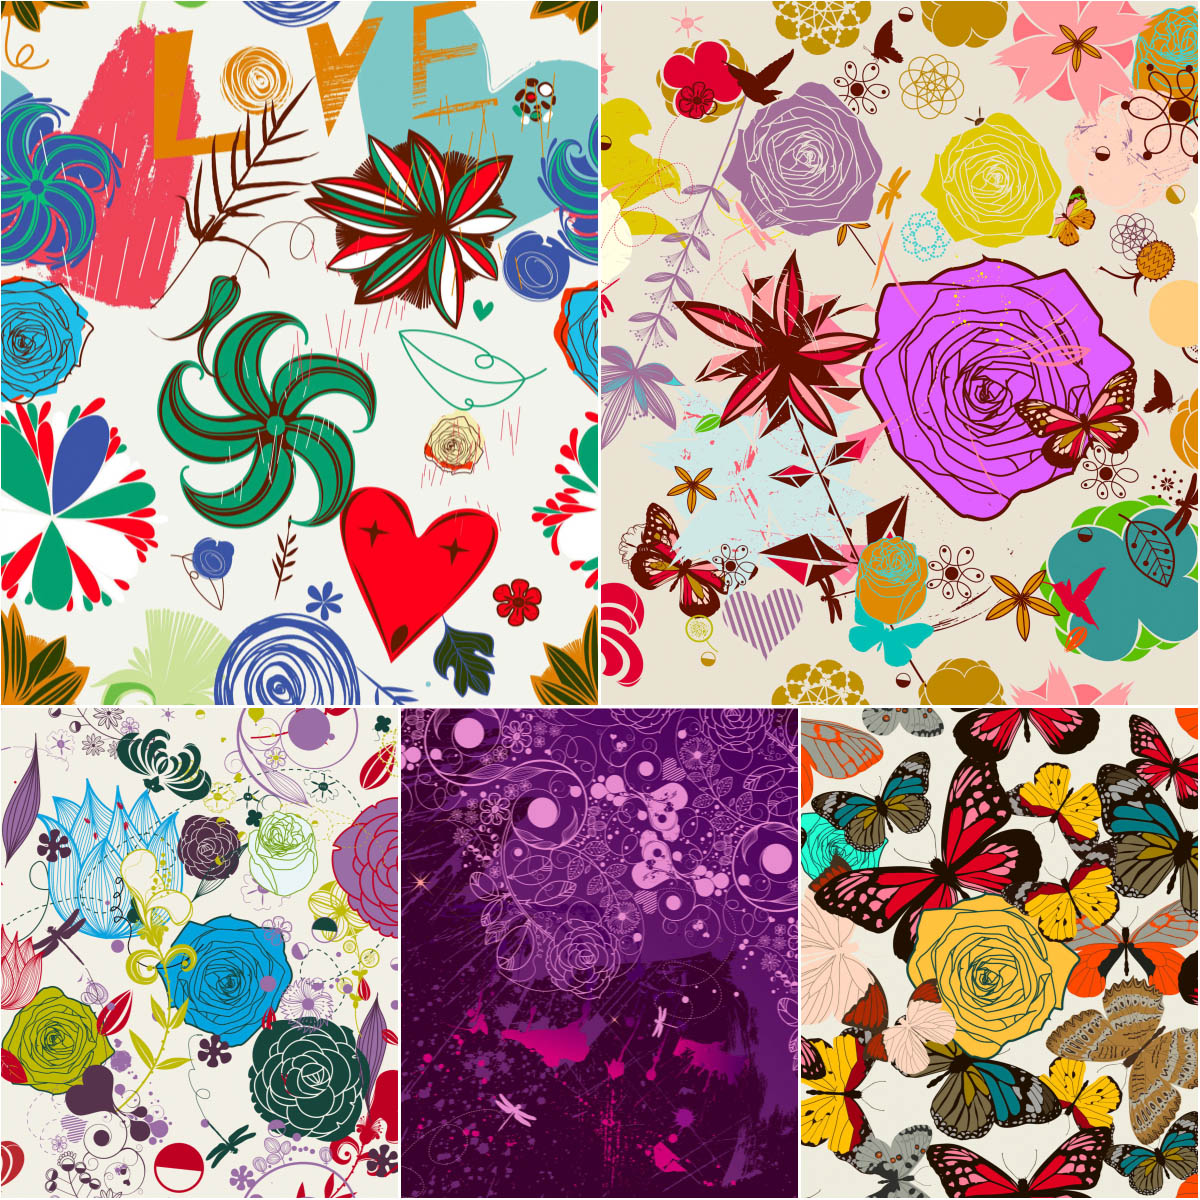 Retro floral seamless backgrounds set 2